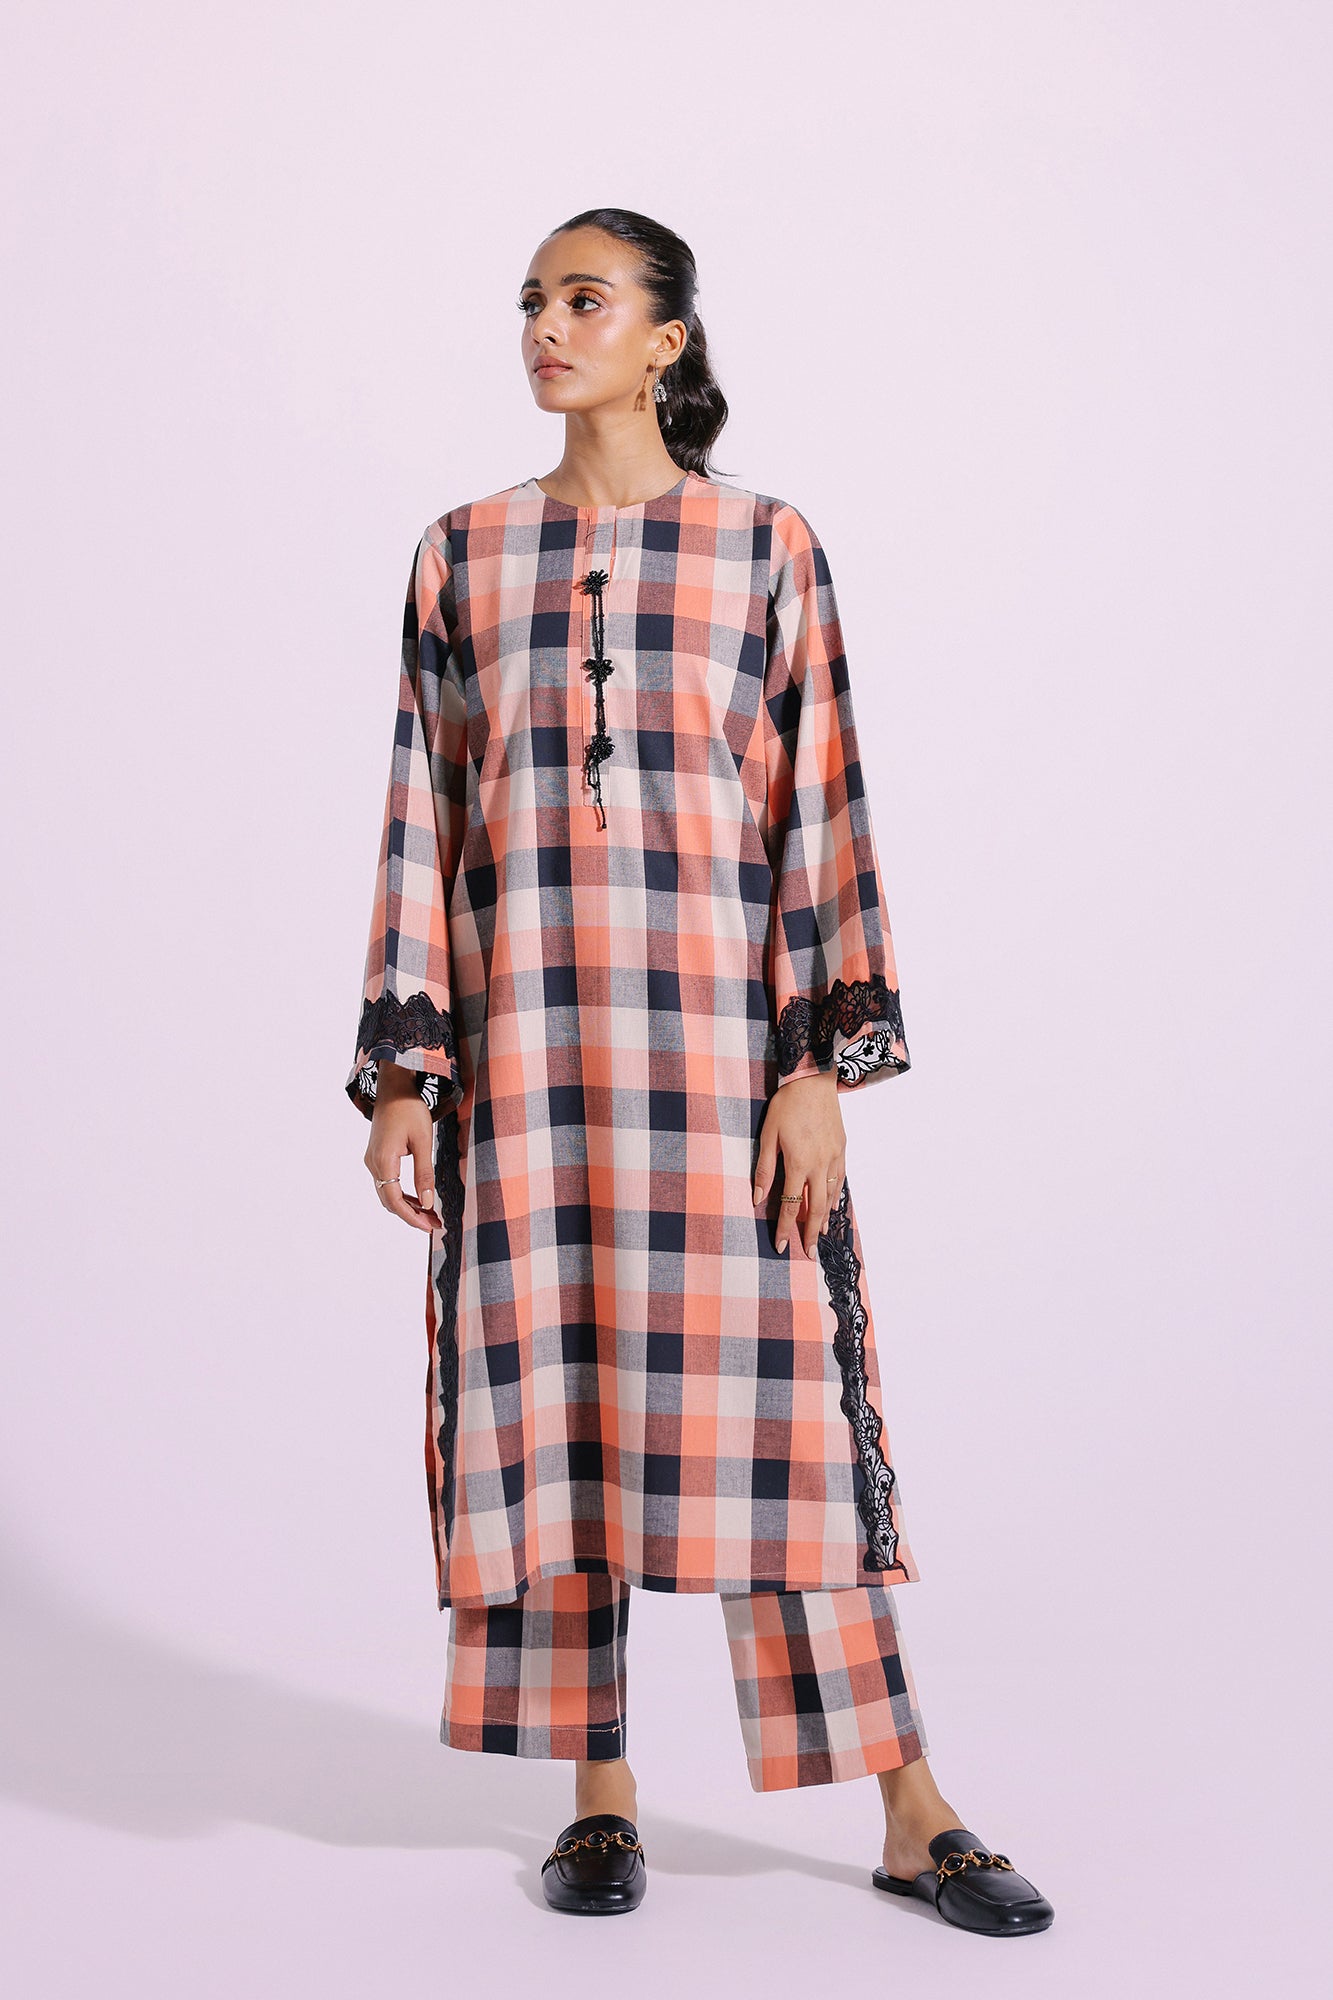 Kurti Designs For Women's in Pakistan, Check & Pay